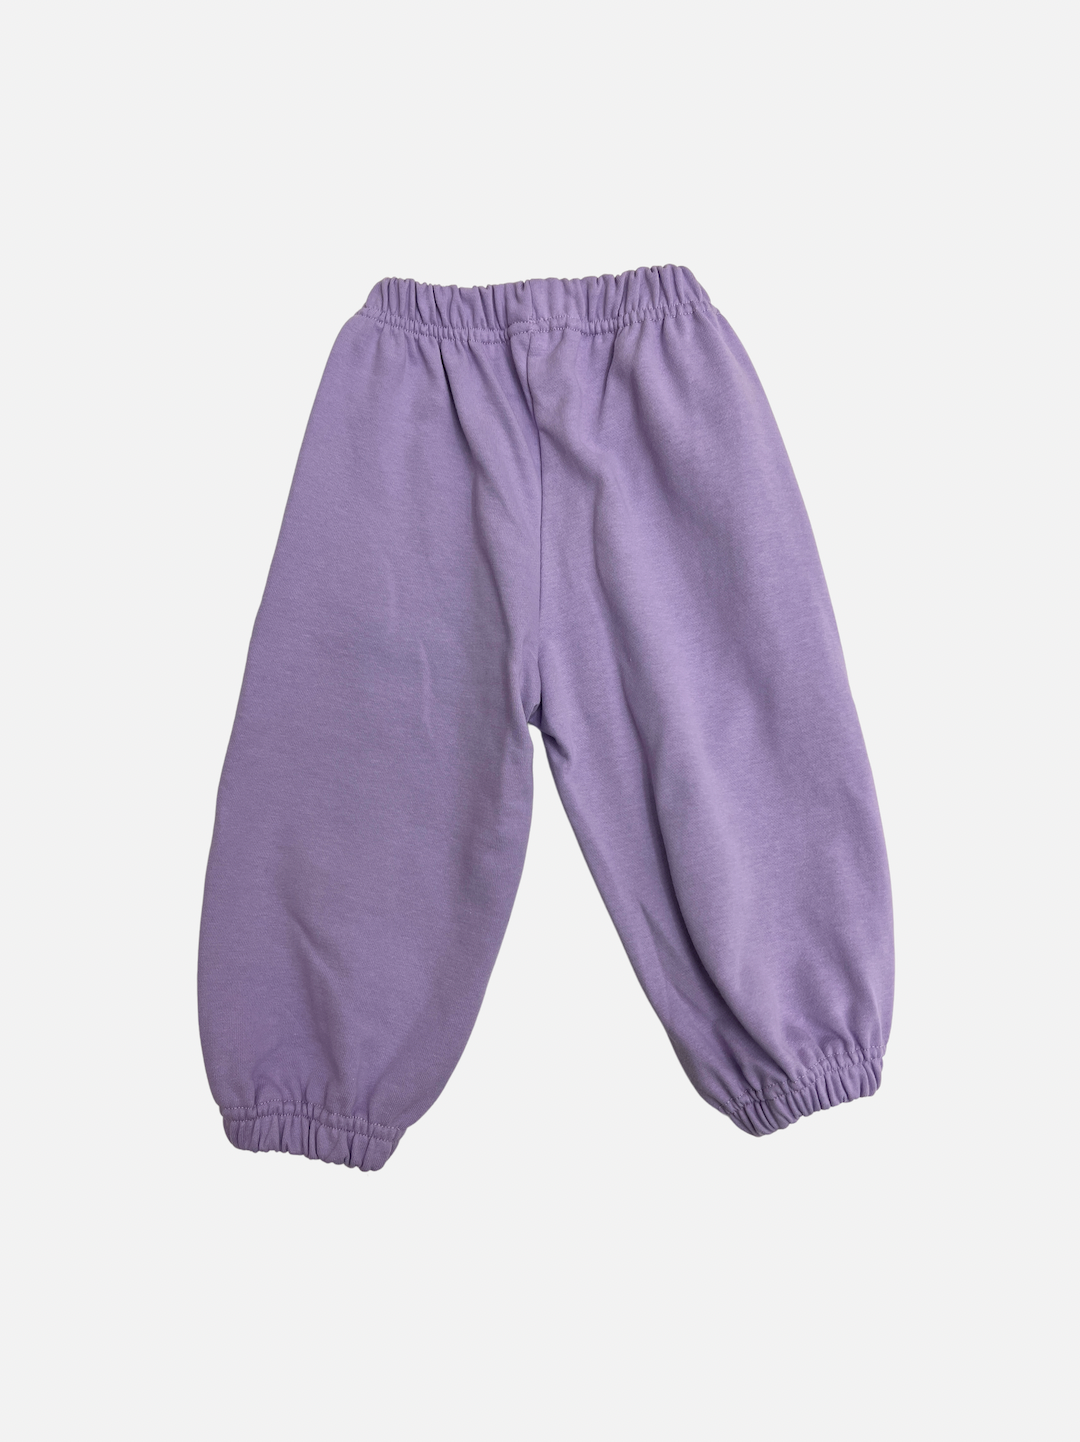 A pair of kids' sweatpants in pale purple, back view